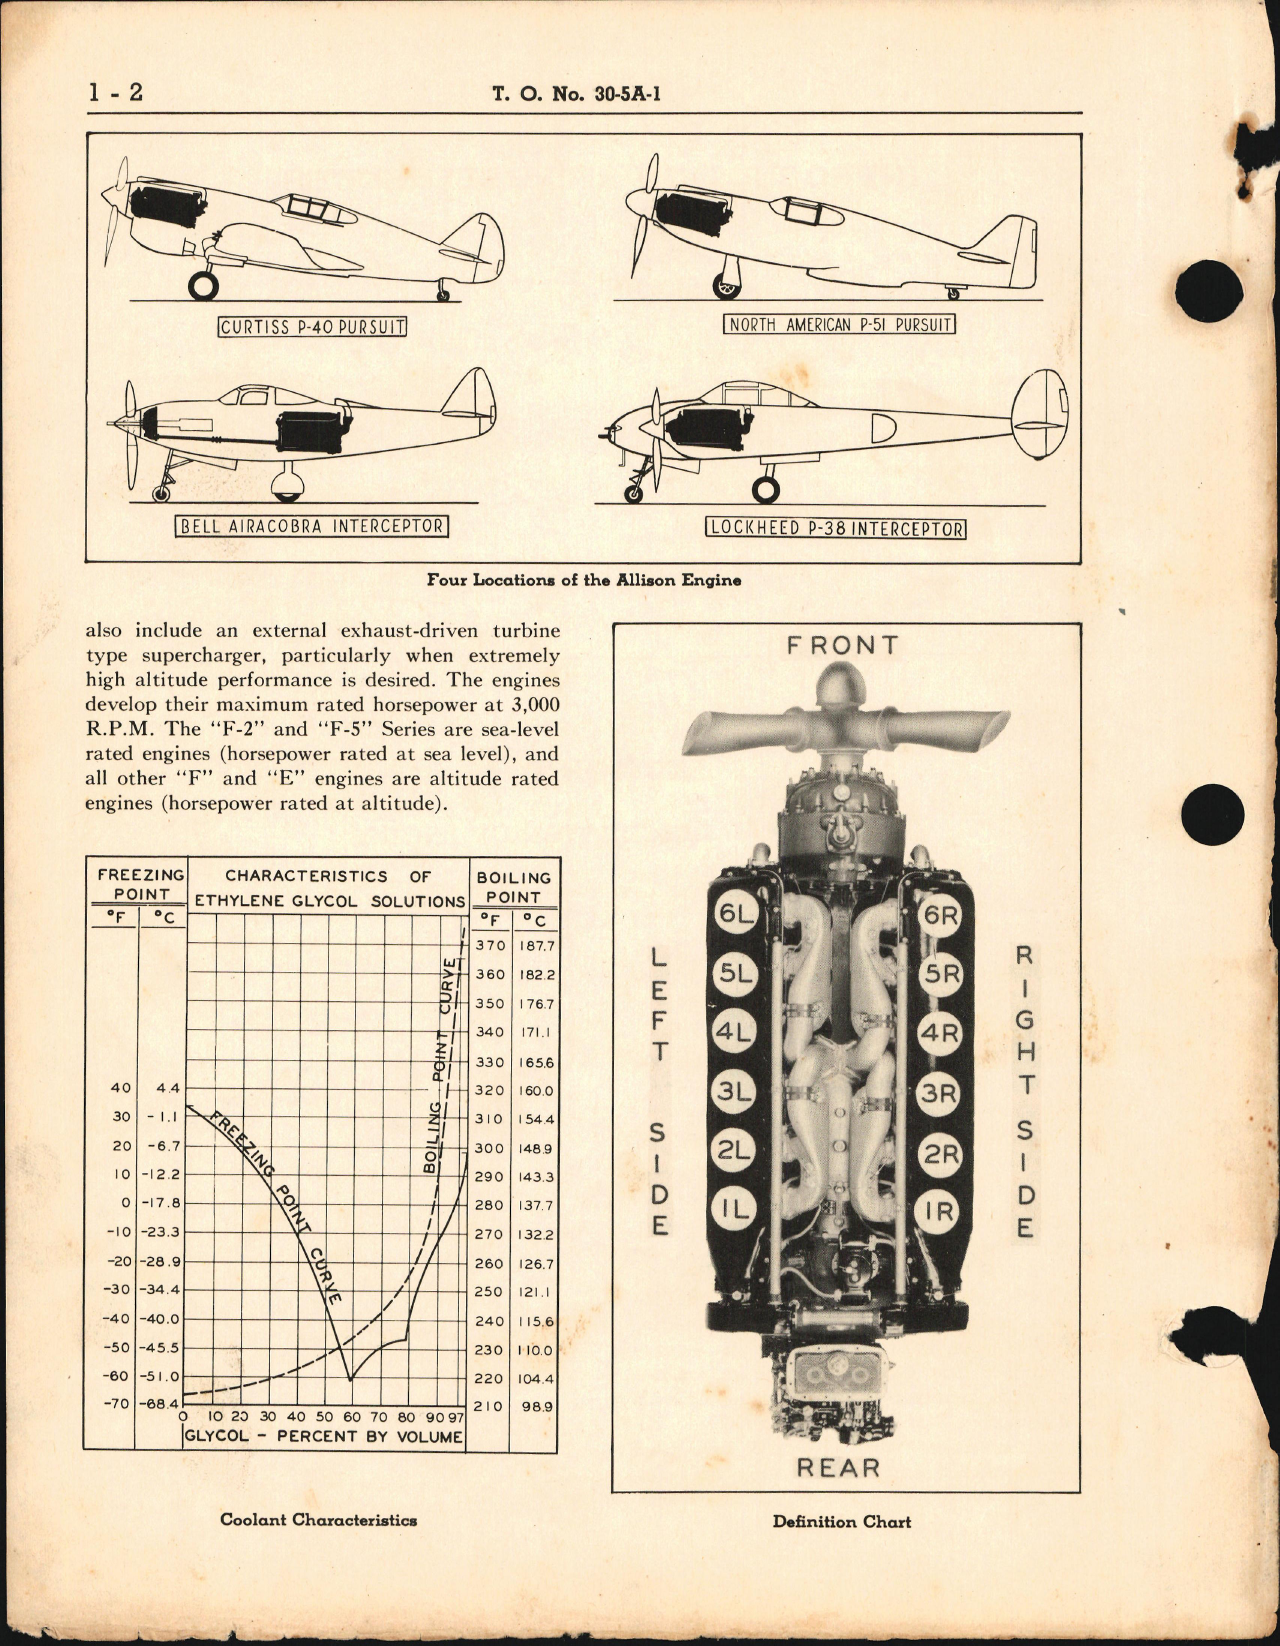 Sample page 6 from AirCorps Library document: Information Guide for Allison V-1710 E and F Engines